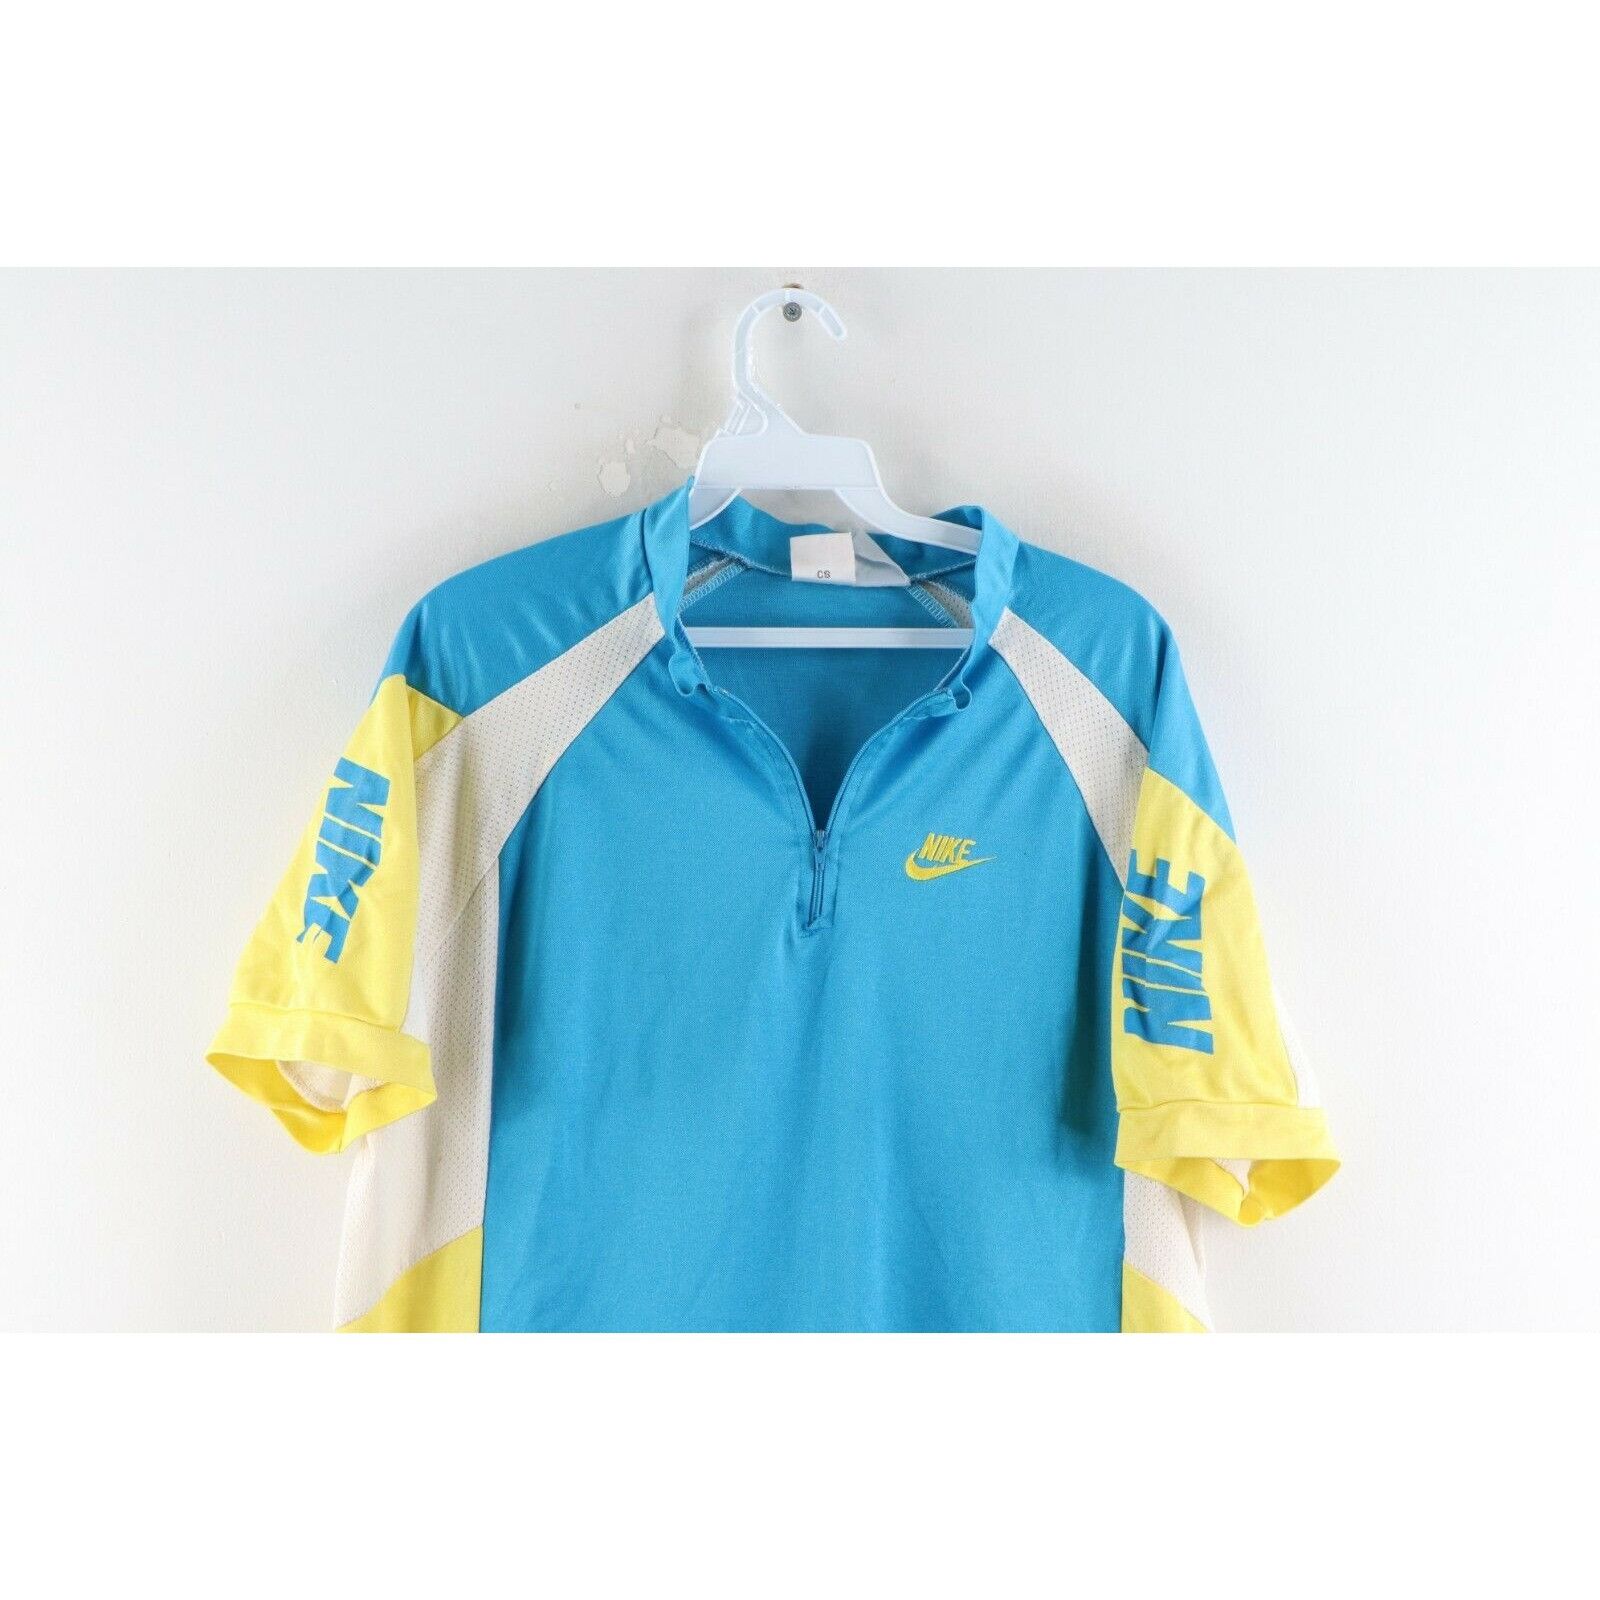 Nike Vintage 90s Nike Color Block Bicycle Cycling Jersey Size US M / EU 48-50 / 2 - 2 Preview